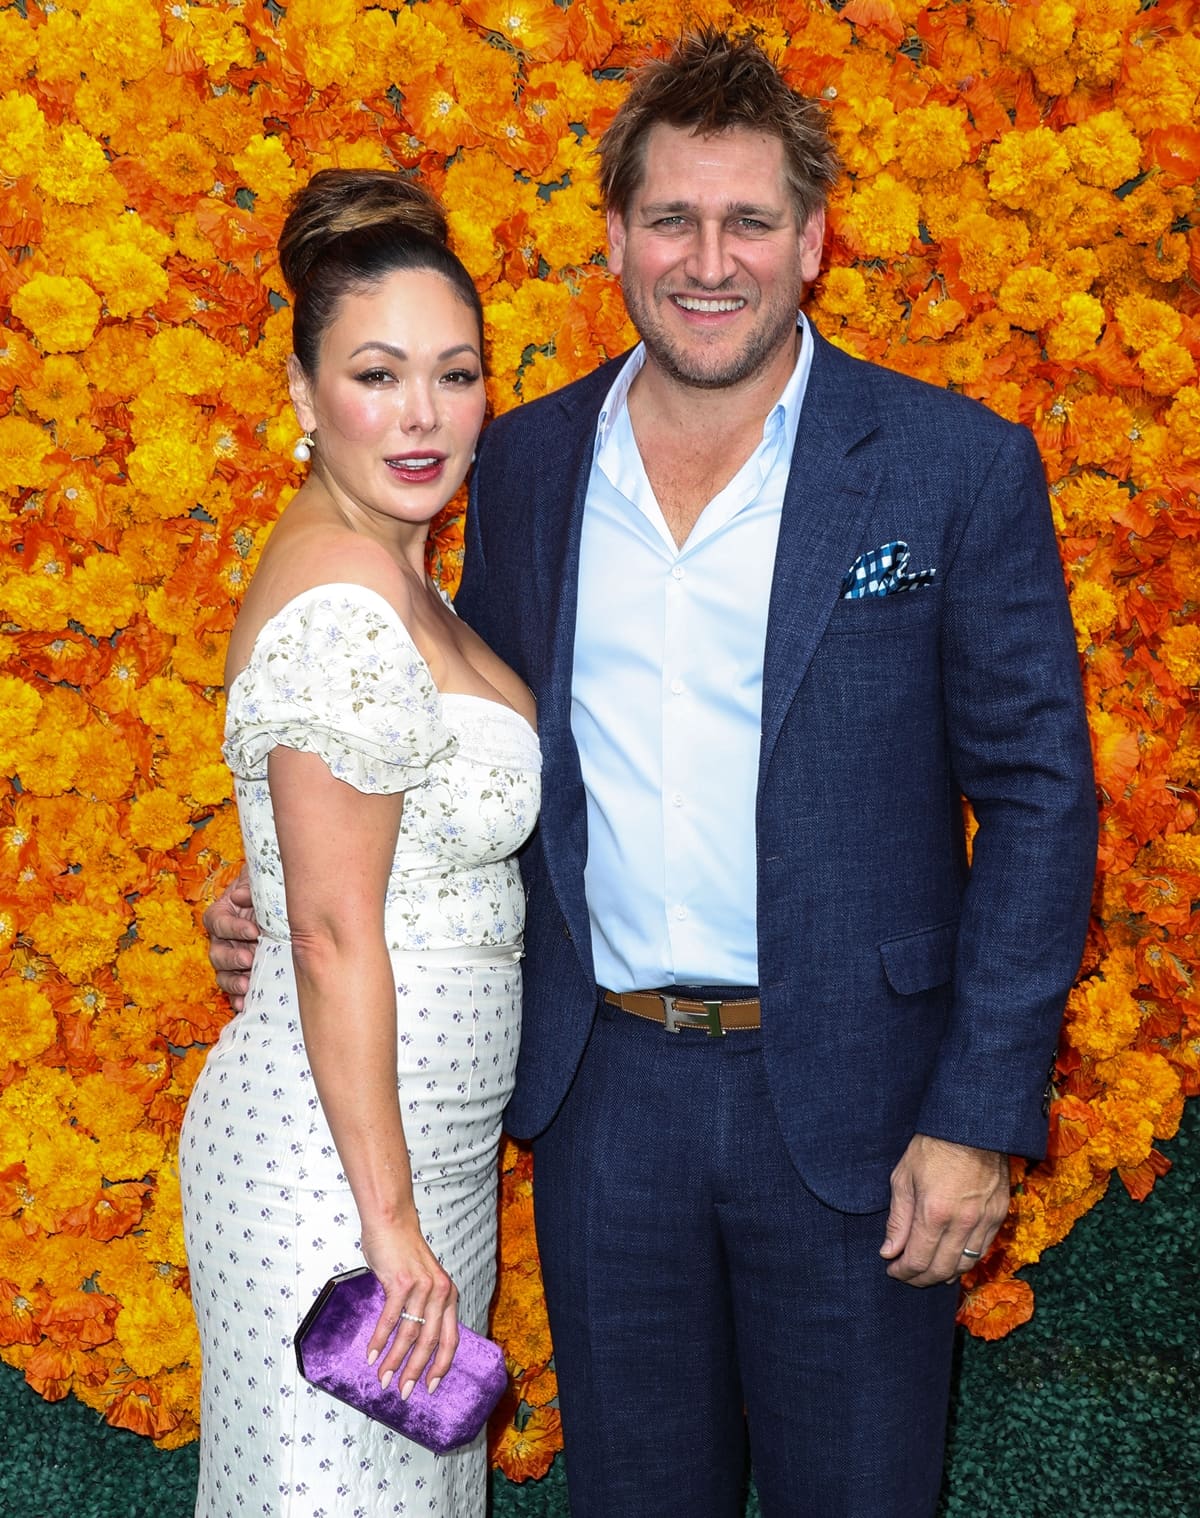 Lindsay Price and Curtis Stone have been married since 2013